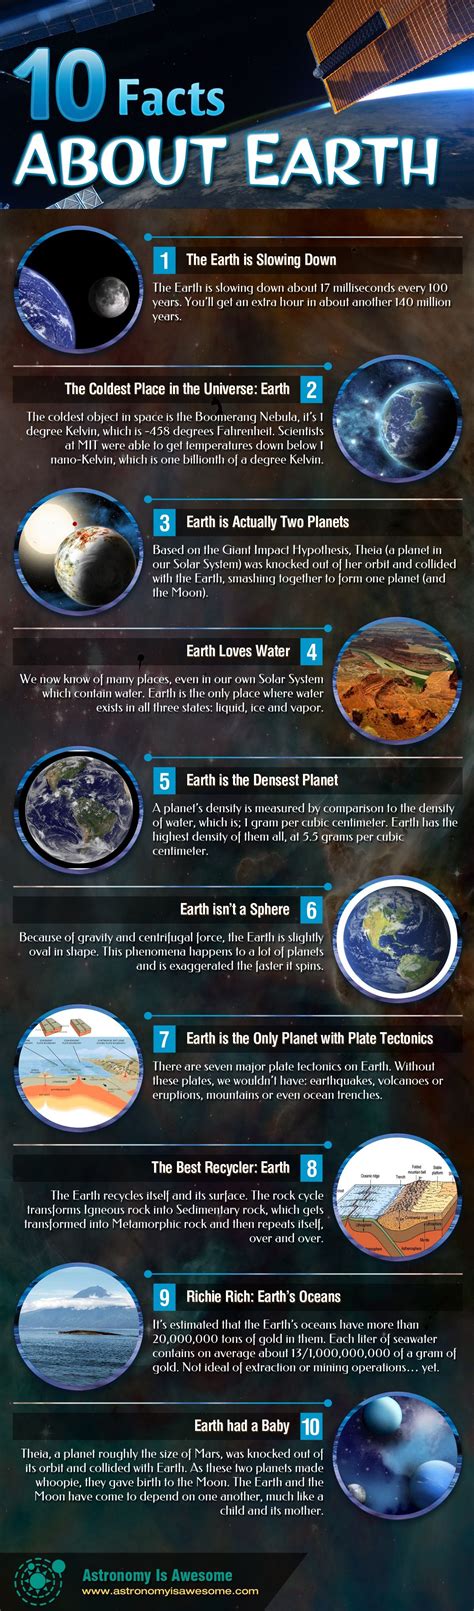 10 Facts About Earth Astronomy Is Awesome Earth Science Facts